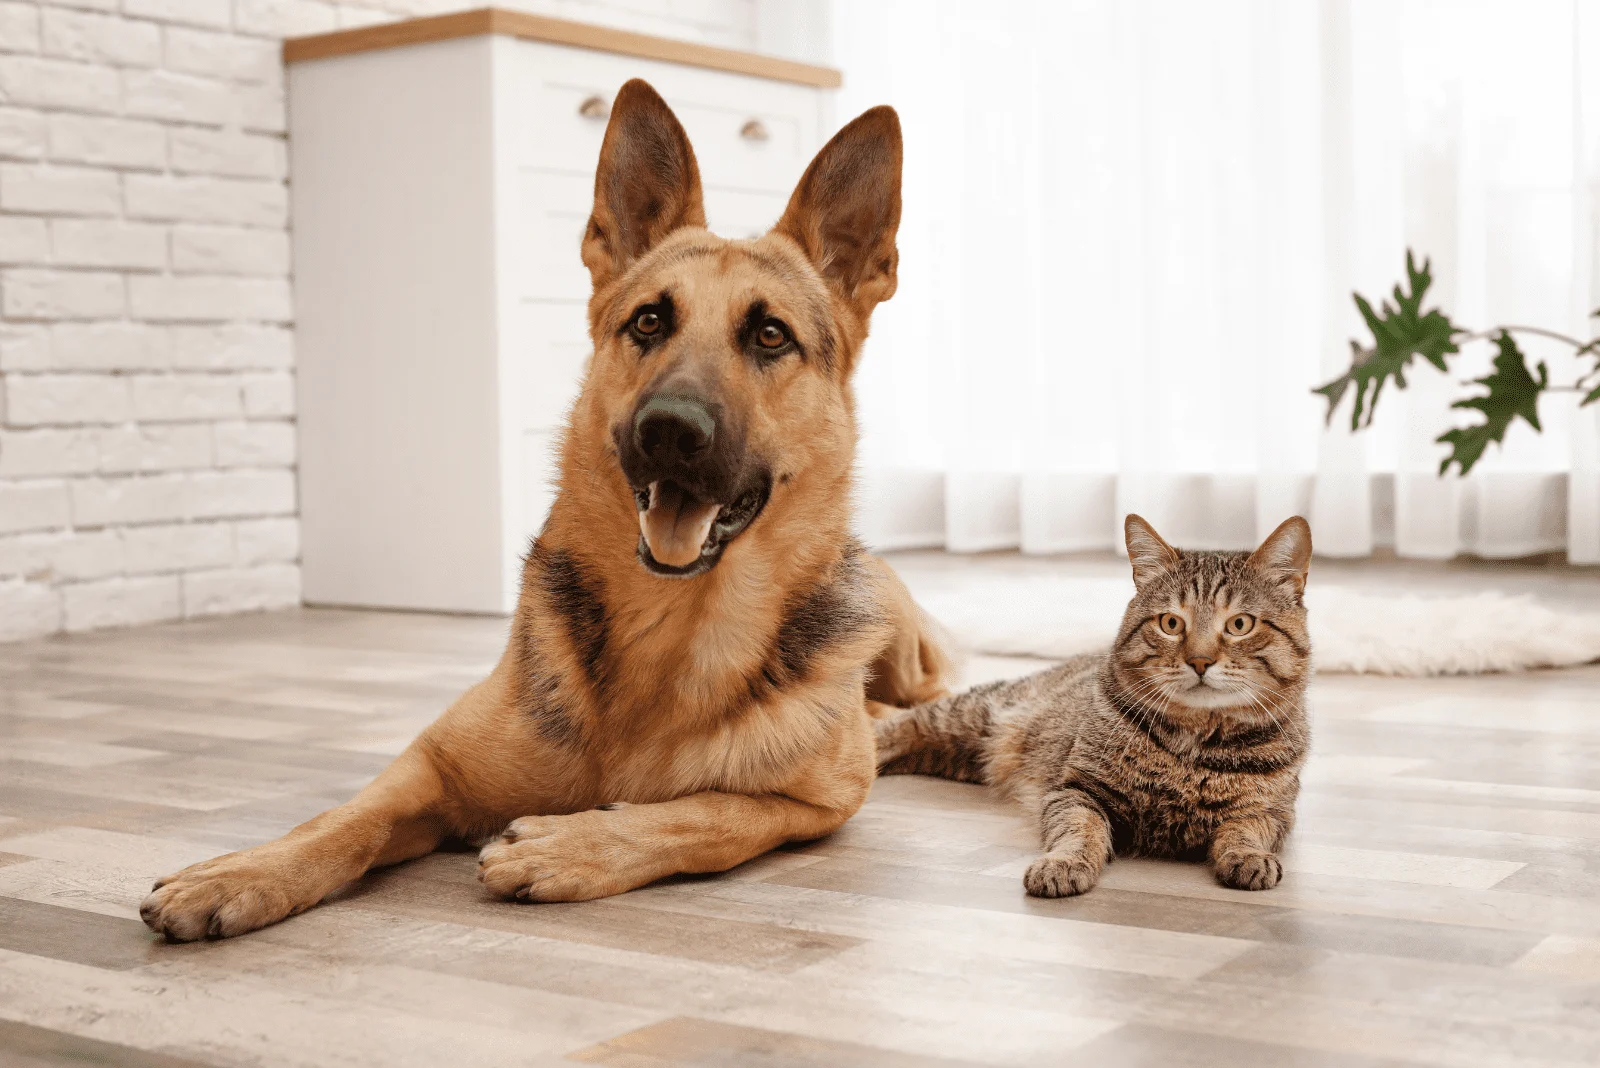 German Shepherds and a cat sitting next to each other